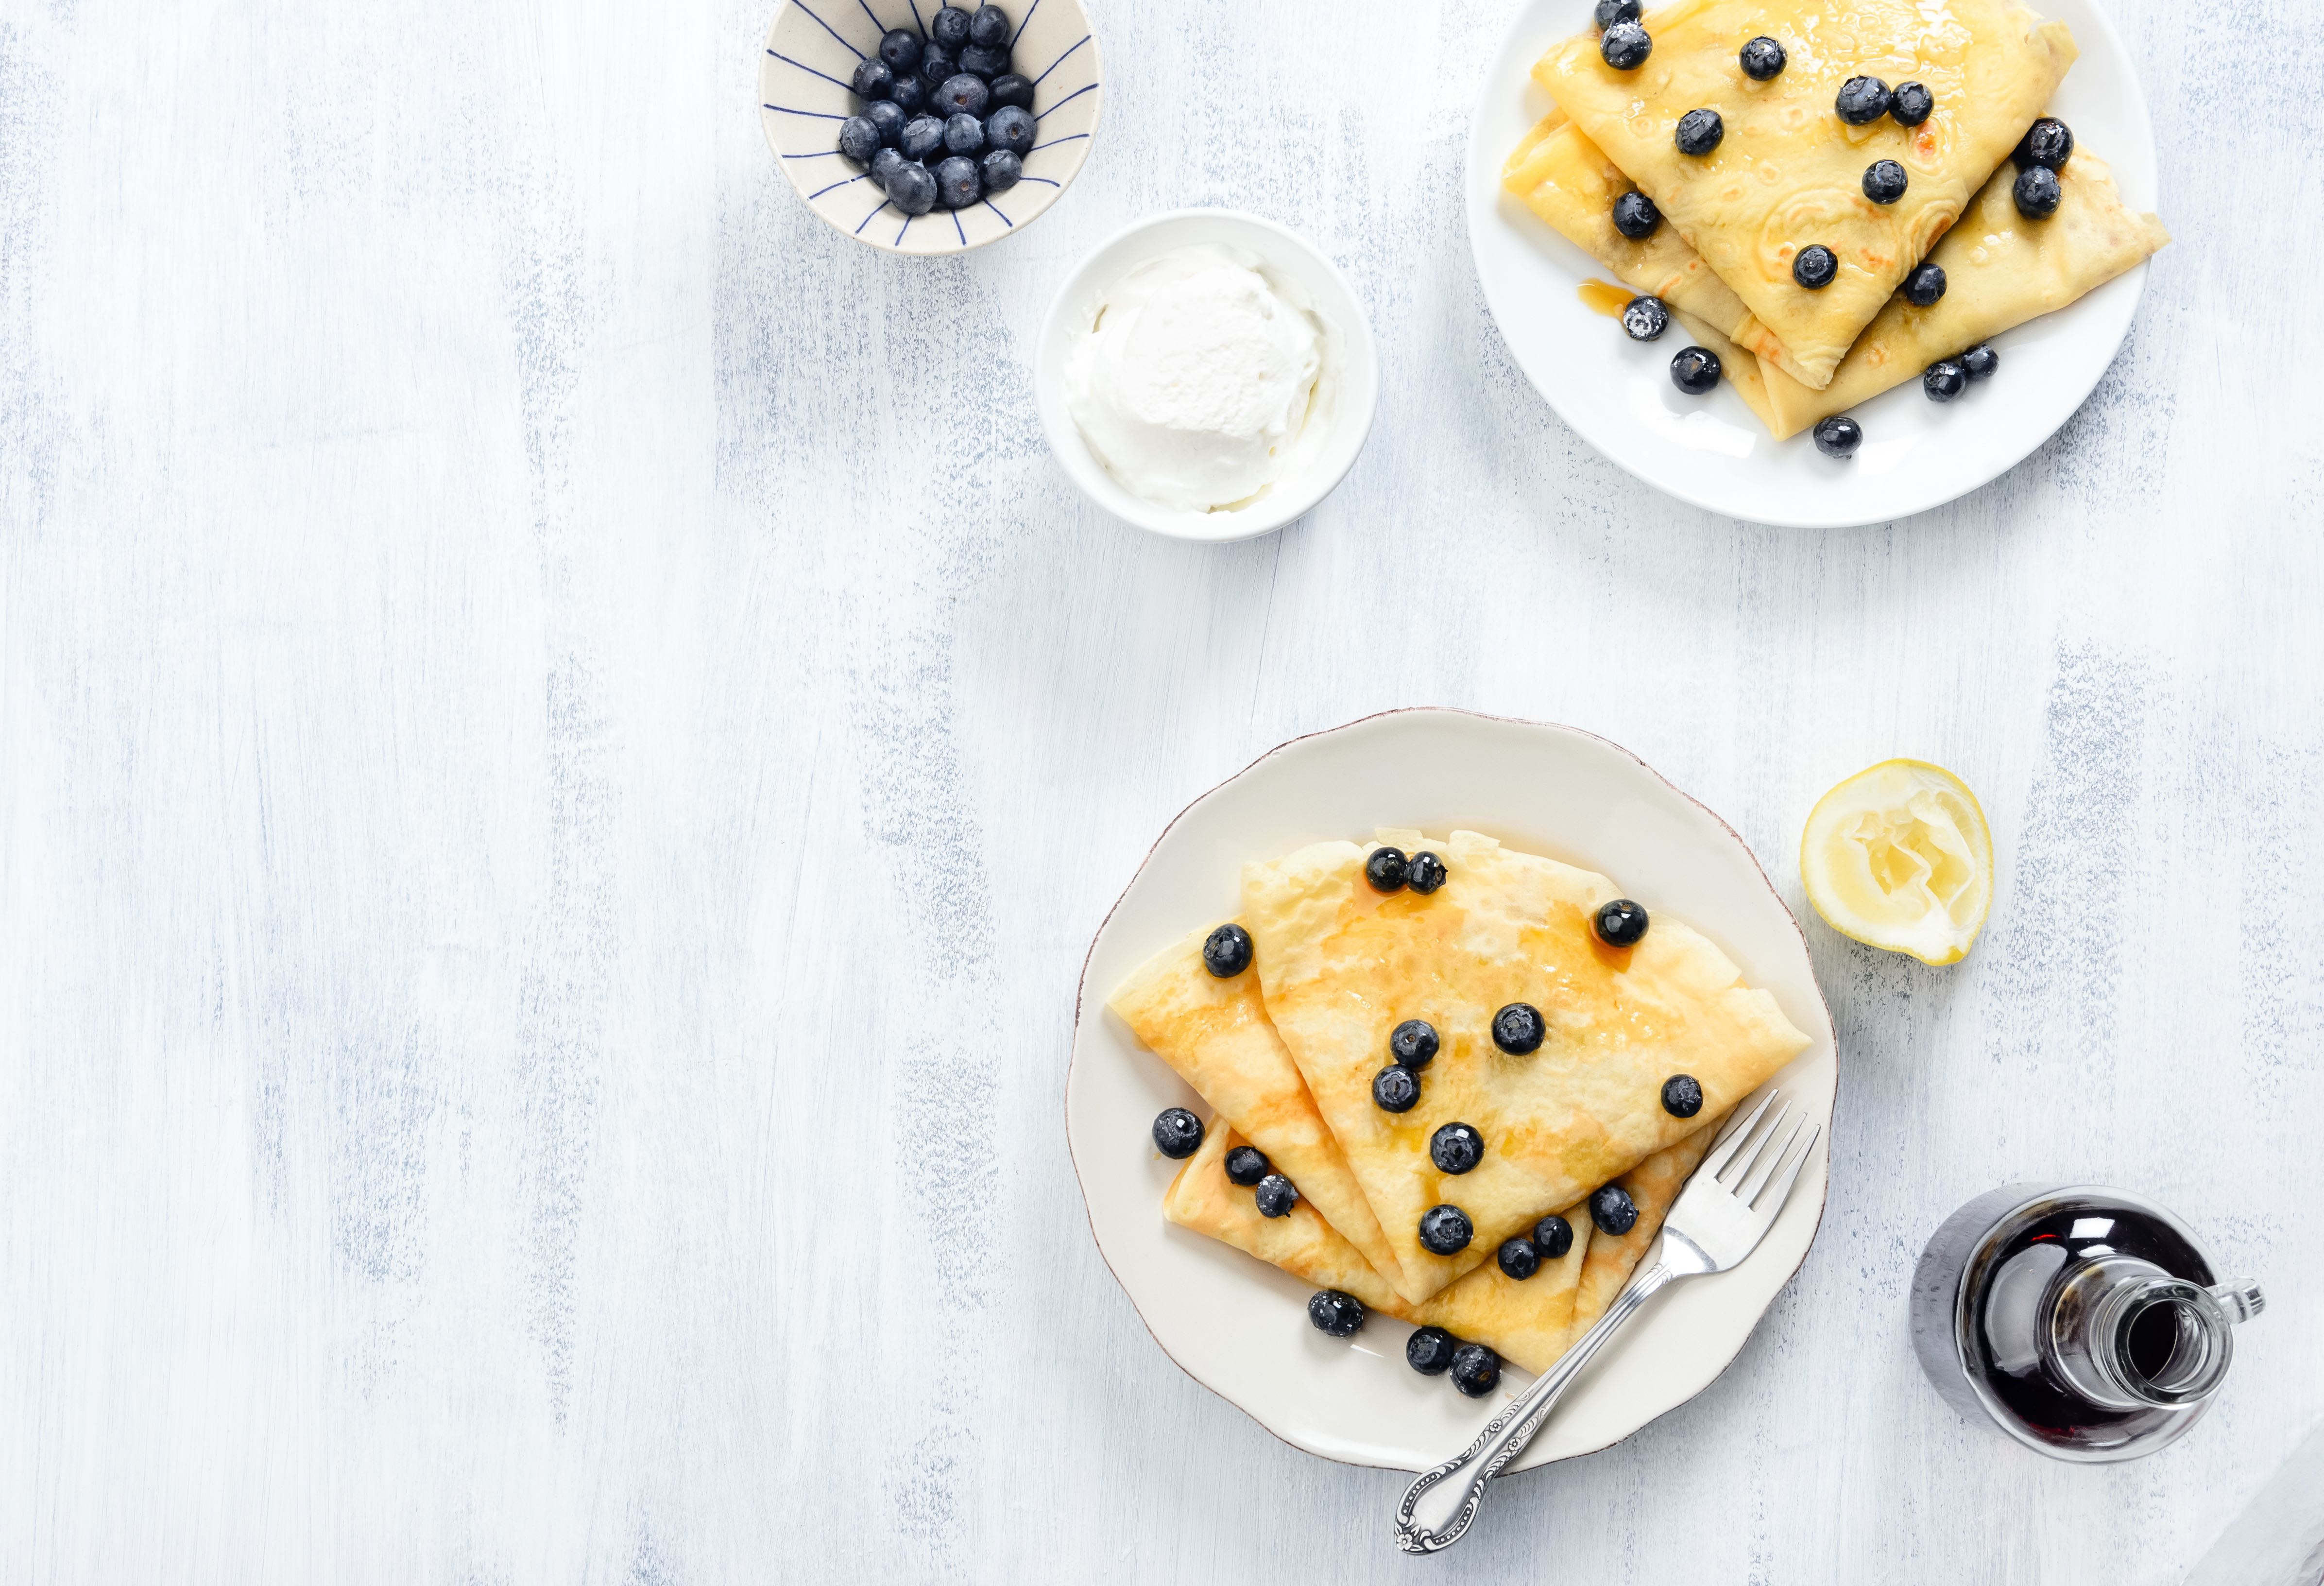 Lemon and Blueberry Crepes